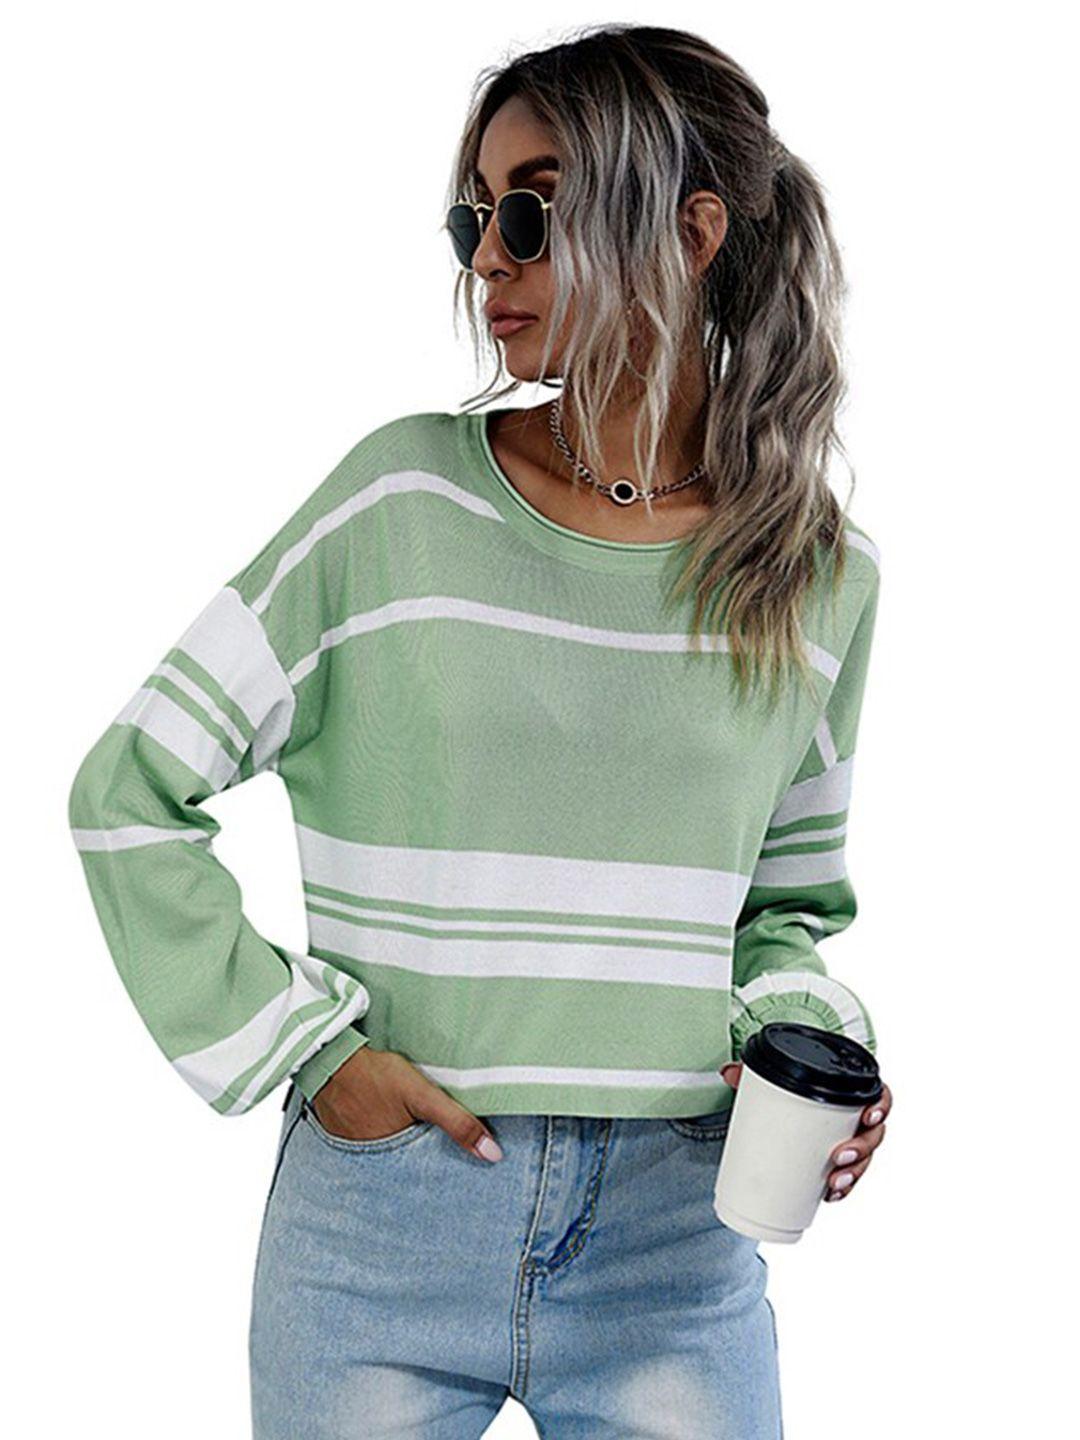 stylecast women sea green & white striped crop pullover sweaters